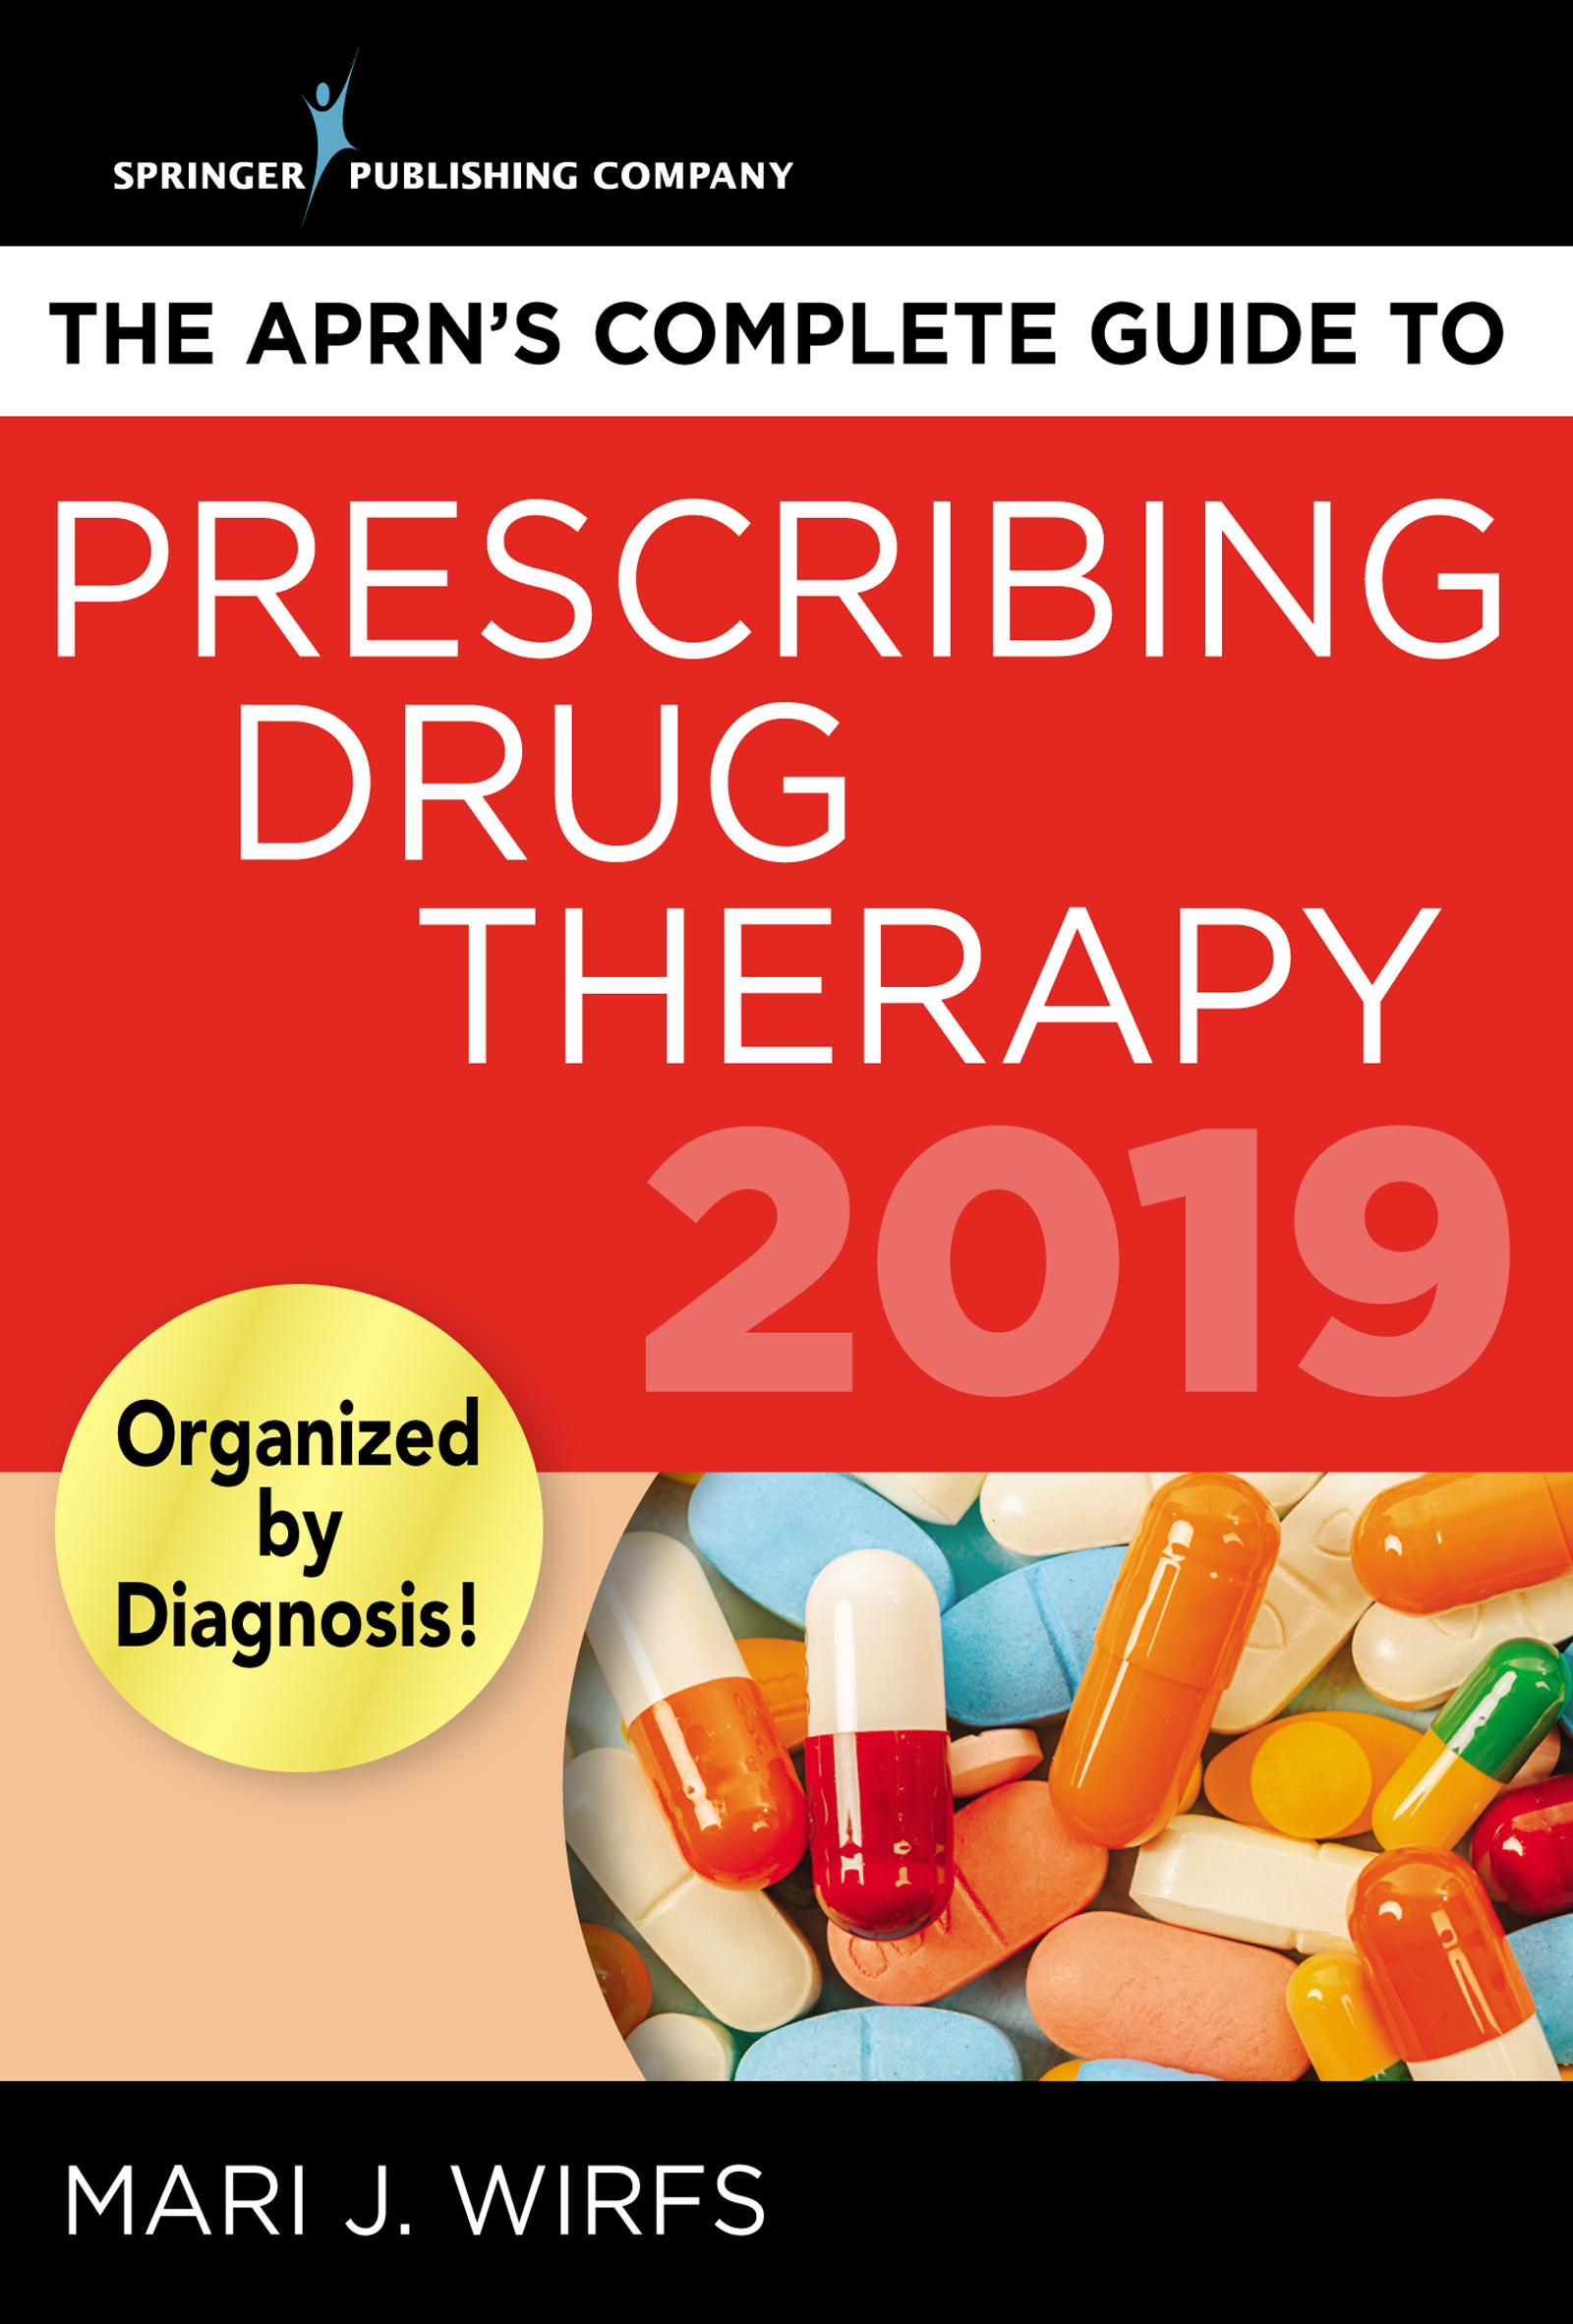 The APRN's Complete Guide to Prescribing Drug Therapy 2019